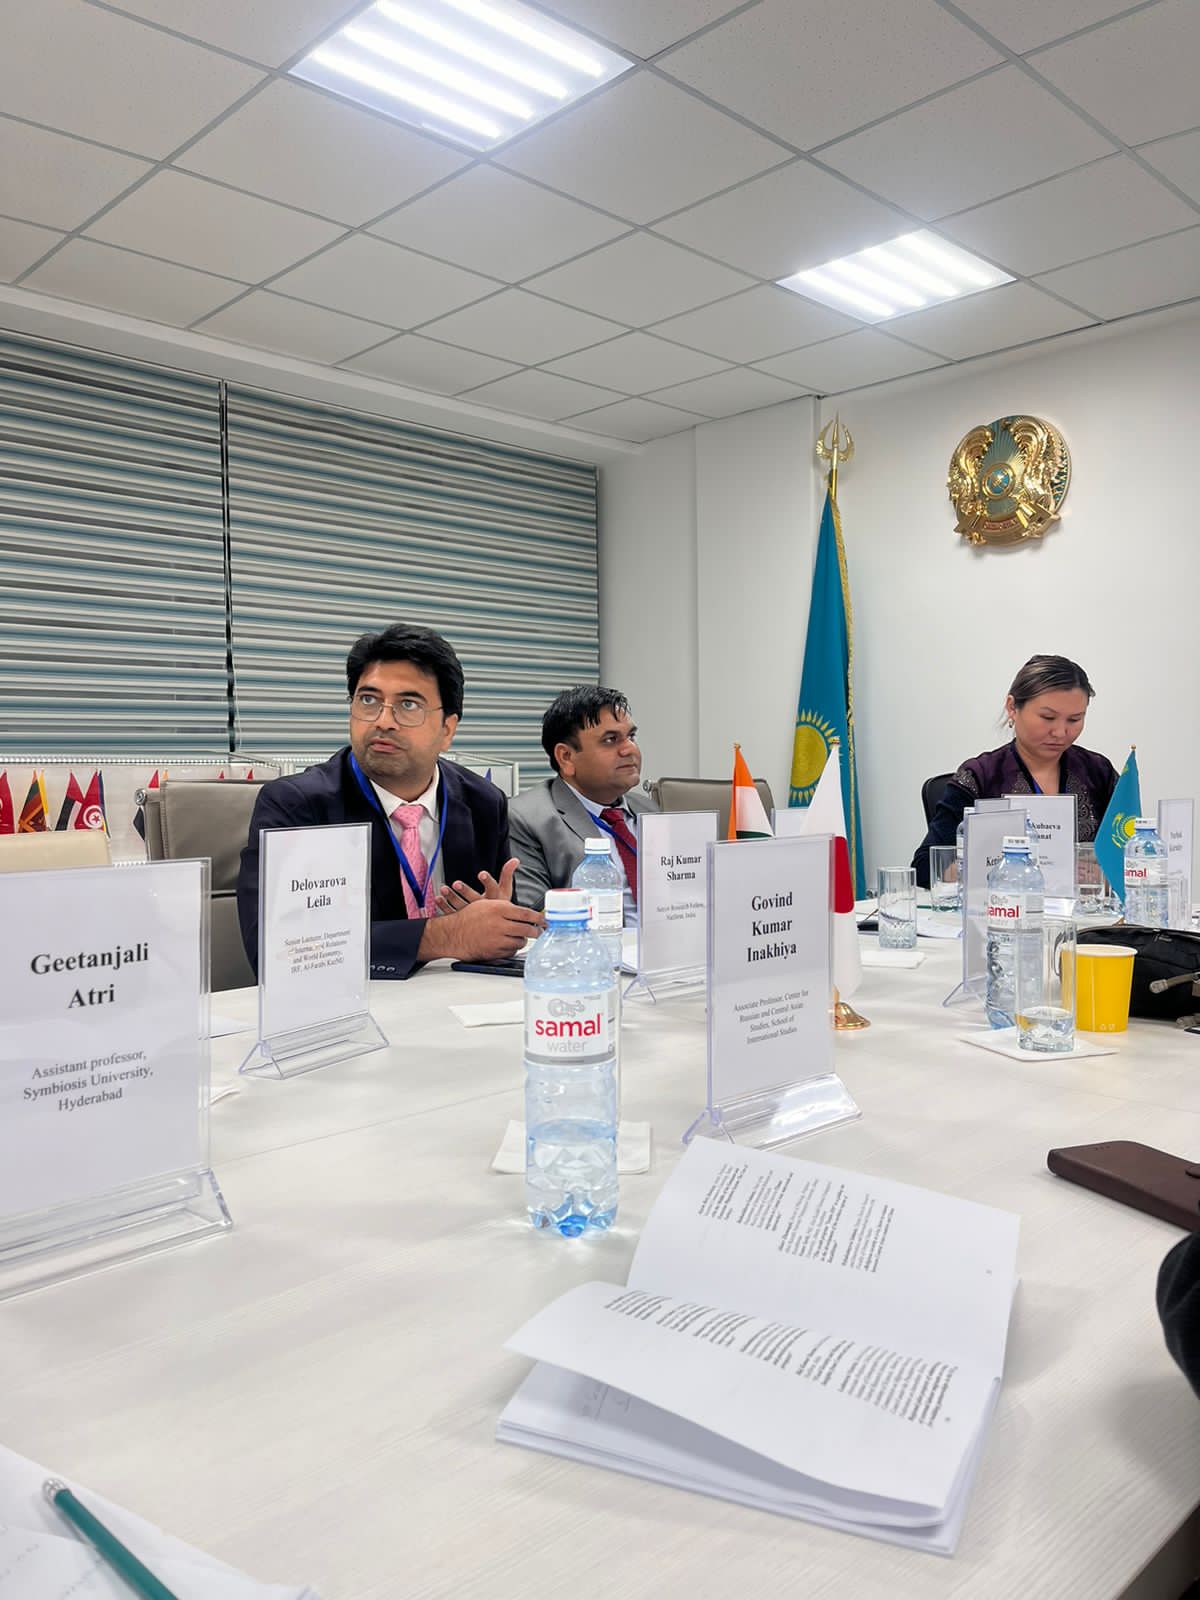 Dr Raj Kumar Sharma, Senior Research Fellow, NatStrat, presented his paper "Food Security and Migration: Insights from South and Central Asia" at an International Conference organised by Al Farabi Kazakh National University, Almaty.